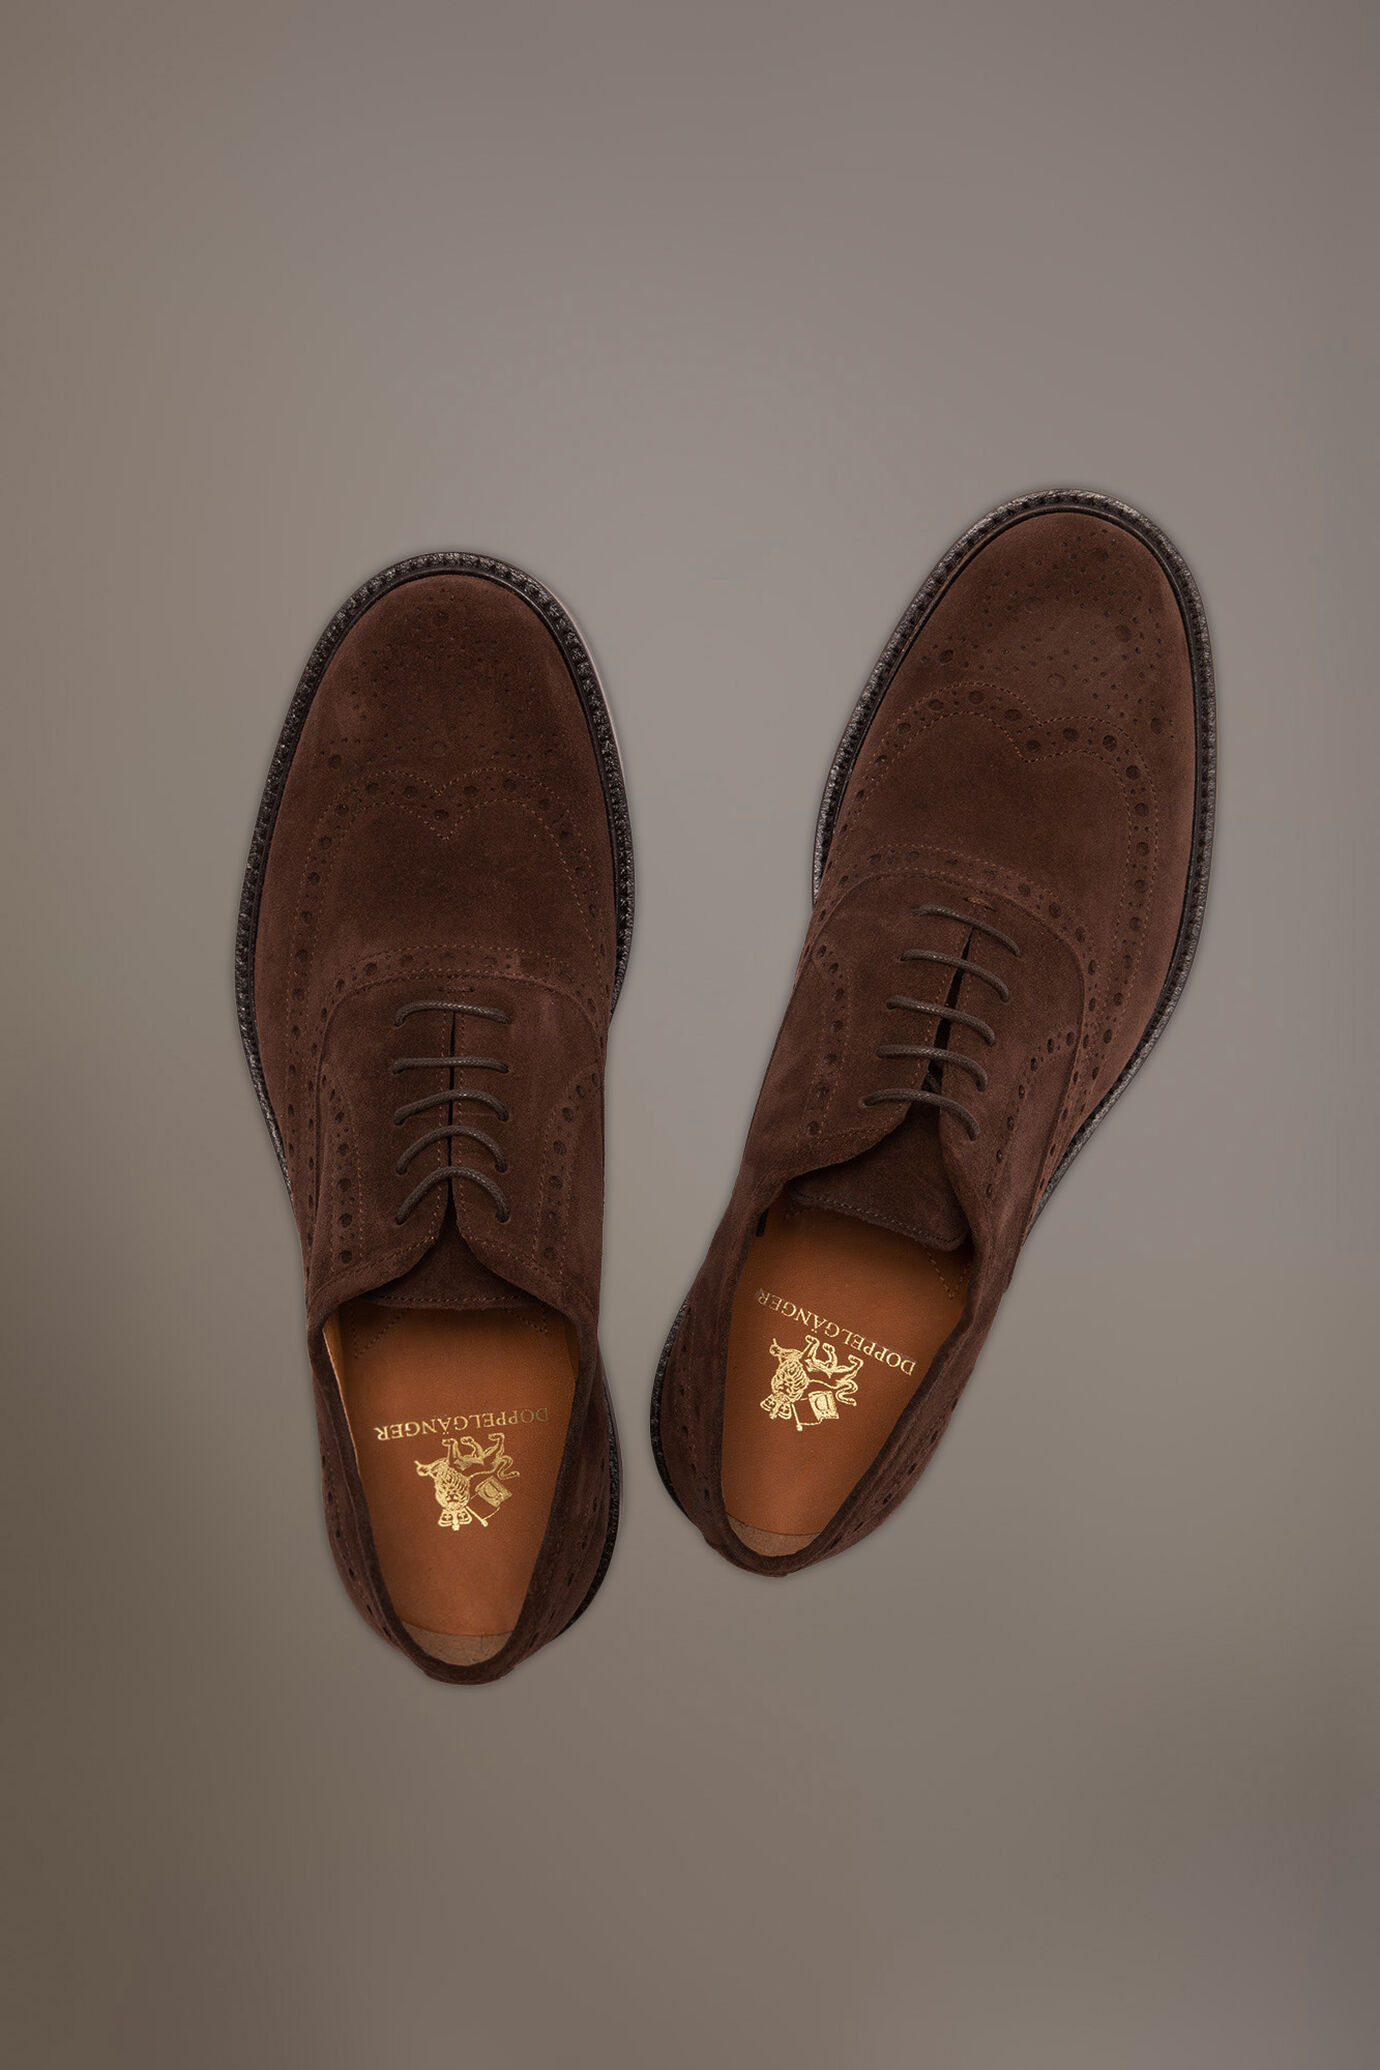 Oxford brouge shoes - 100% leather - suede image number 2